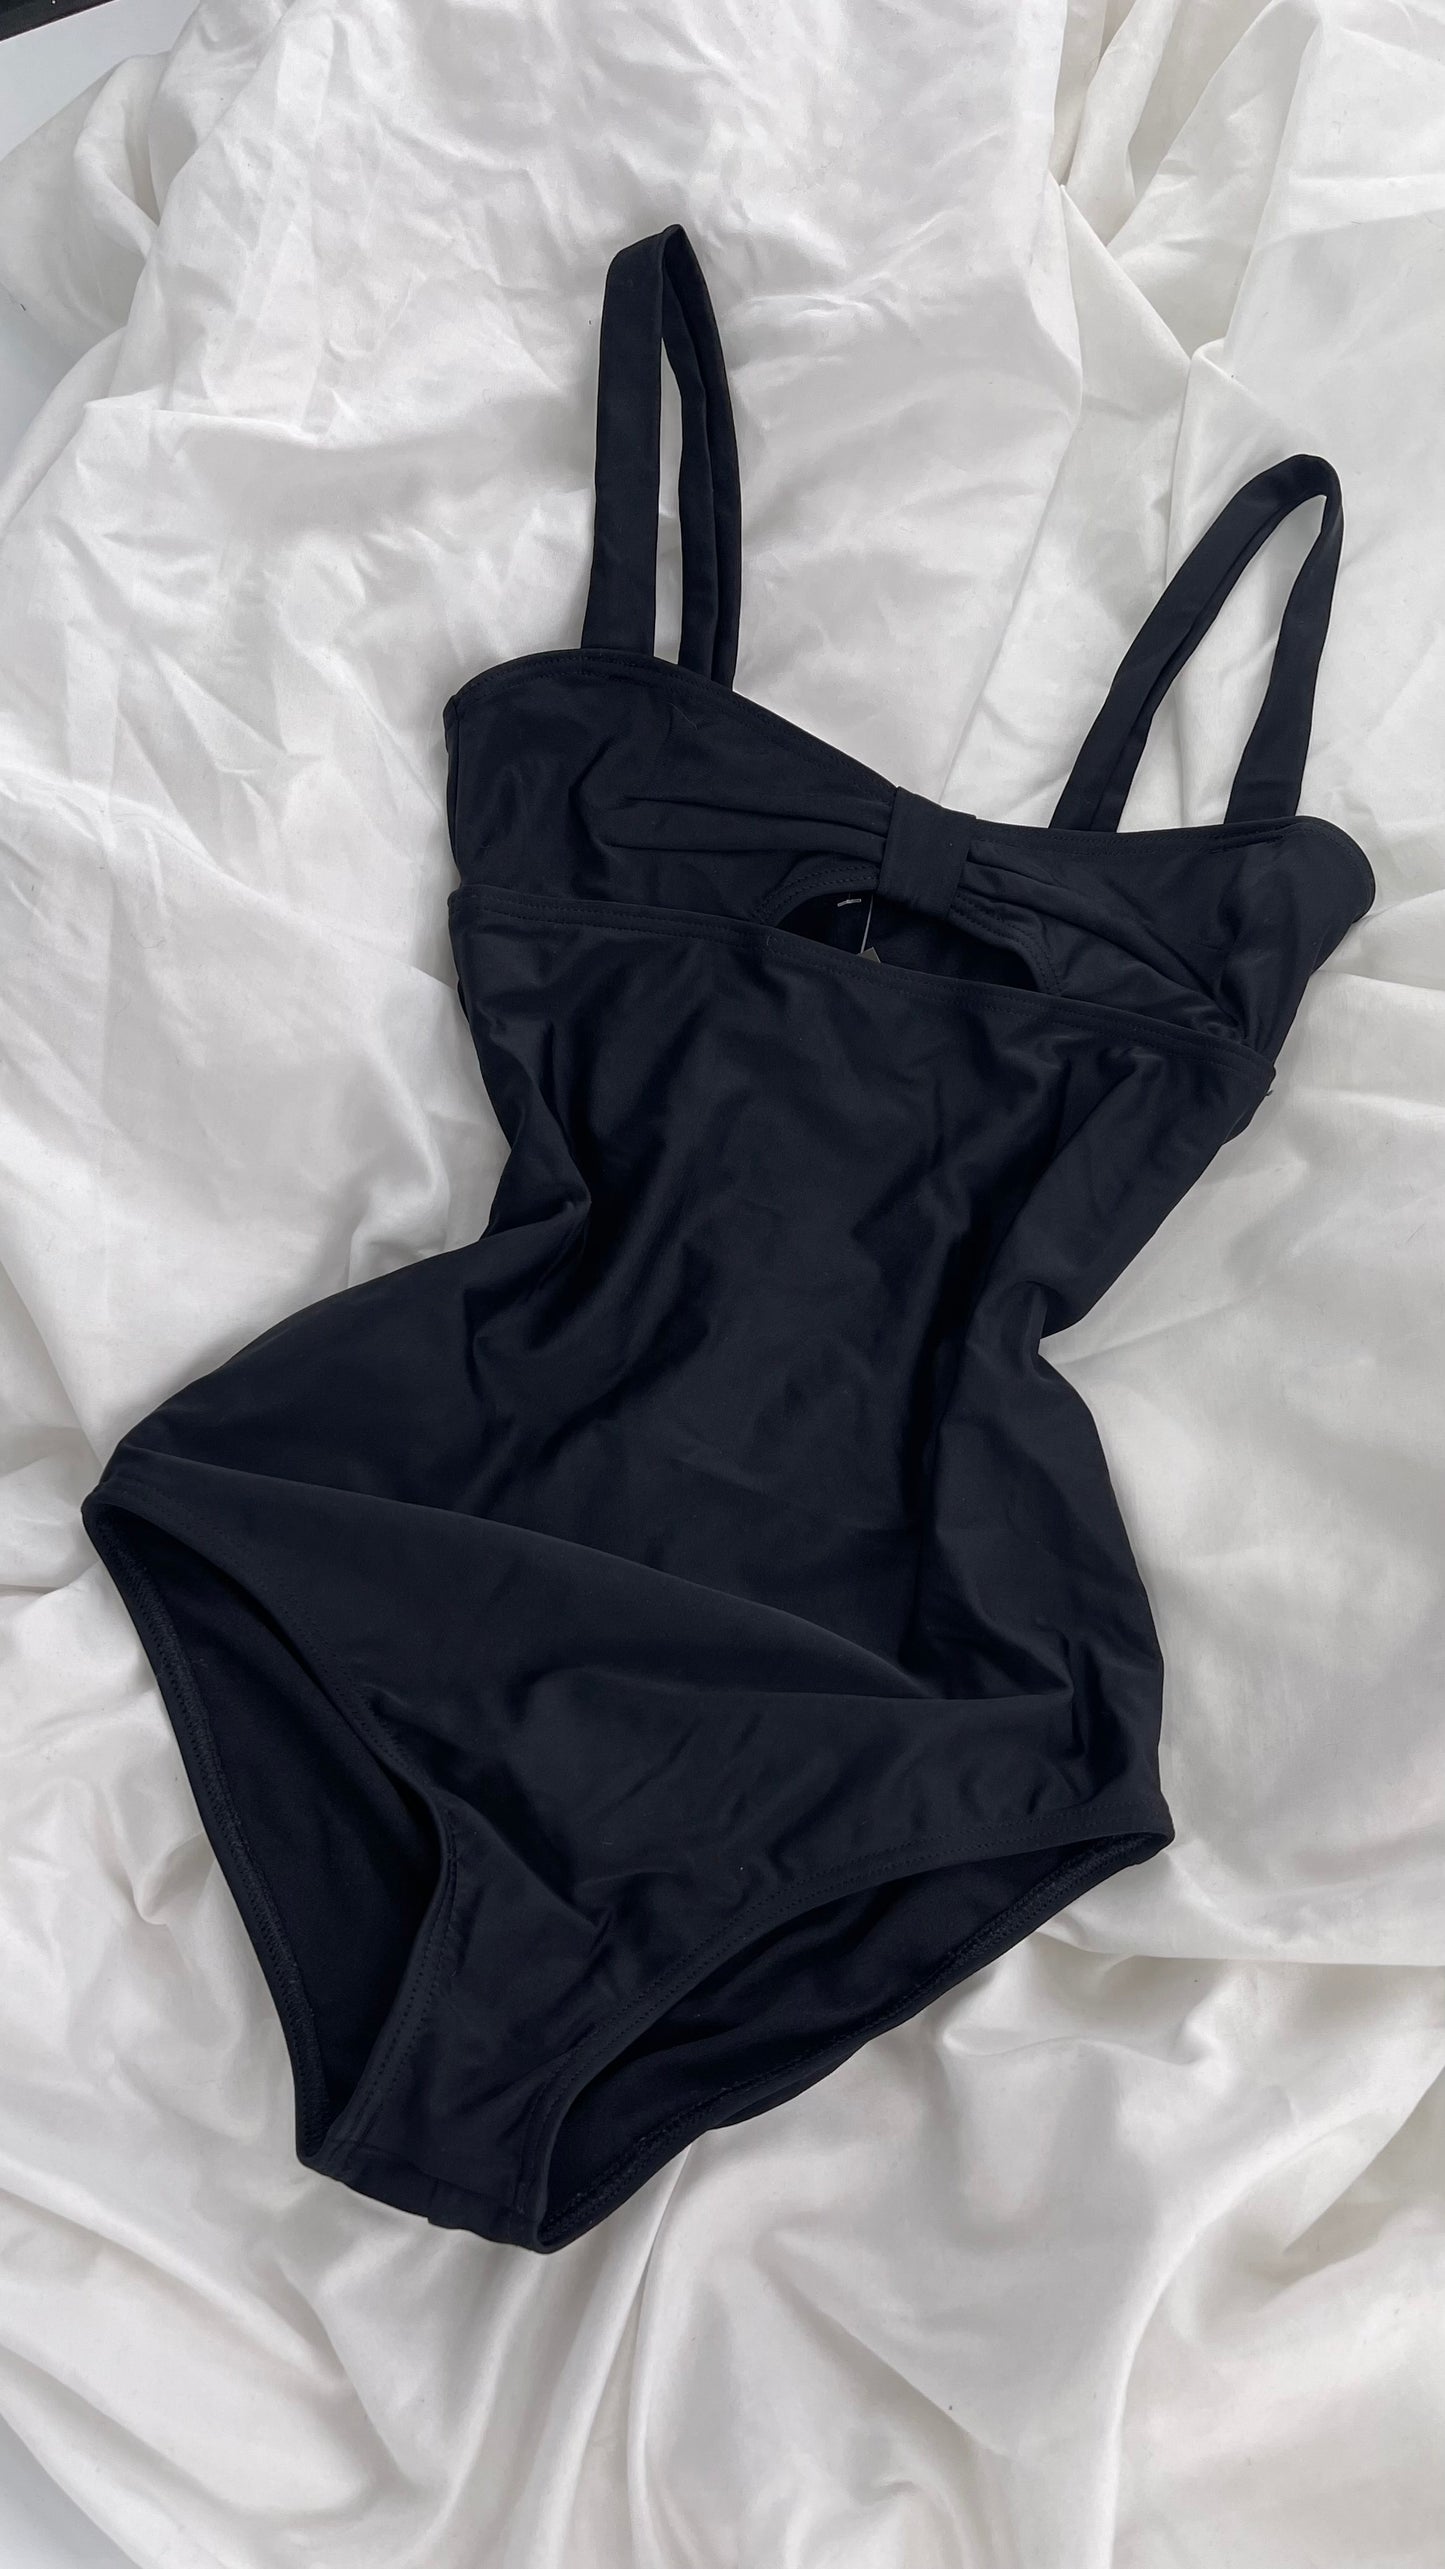 Yes Master x Free People Black Bow Bust Swimsuit (Small)